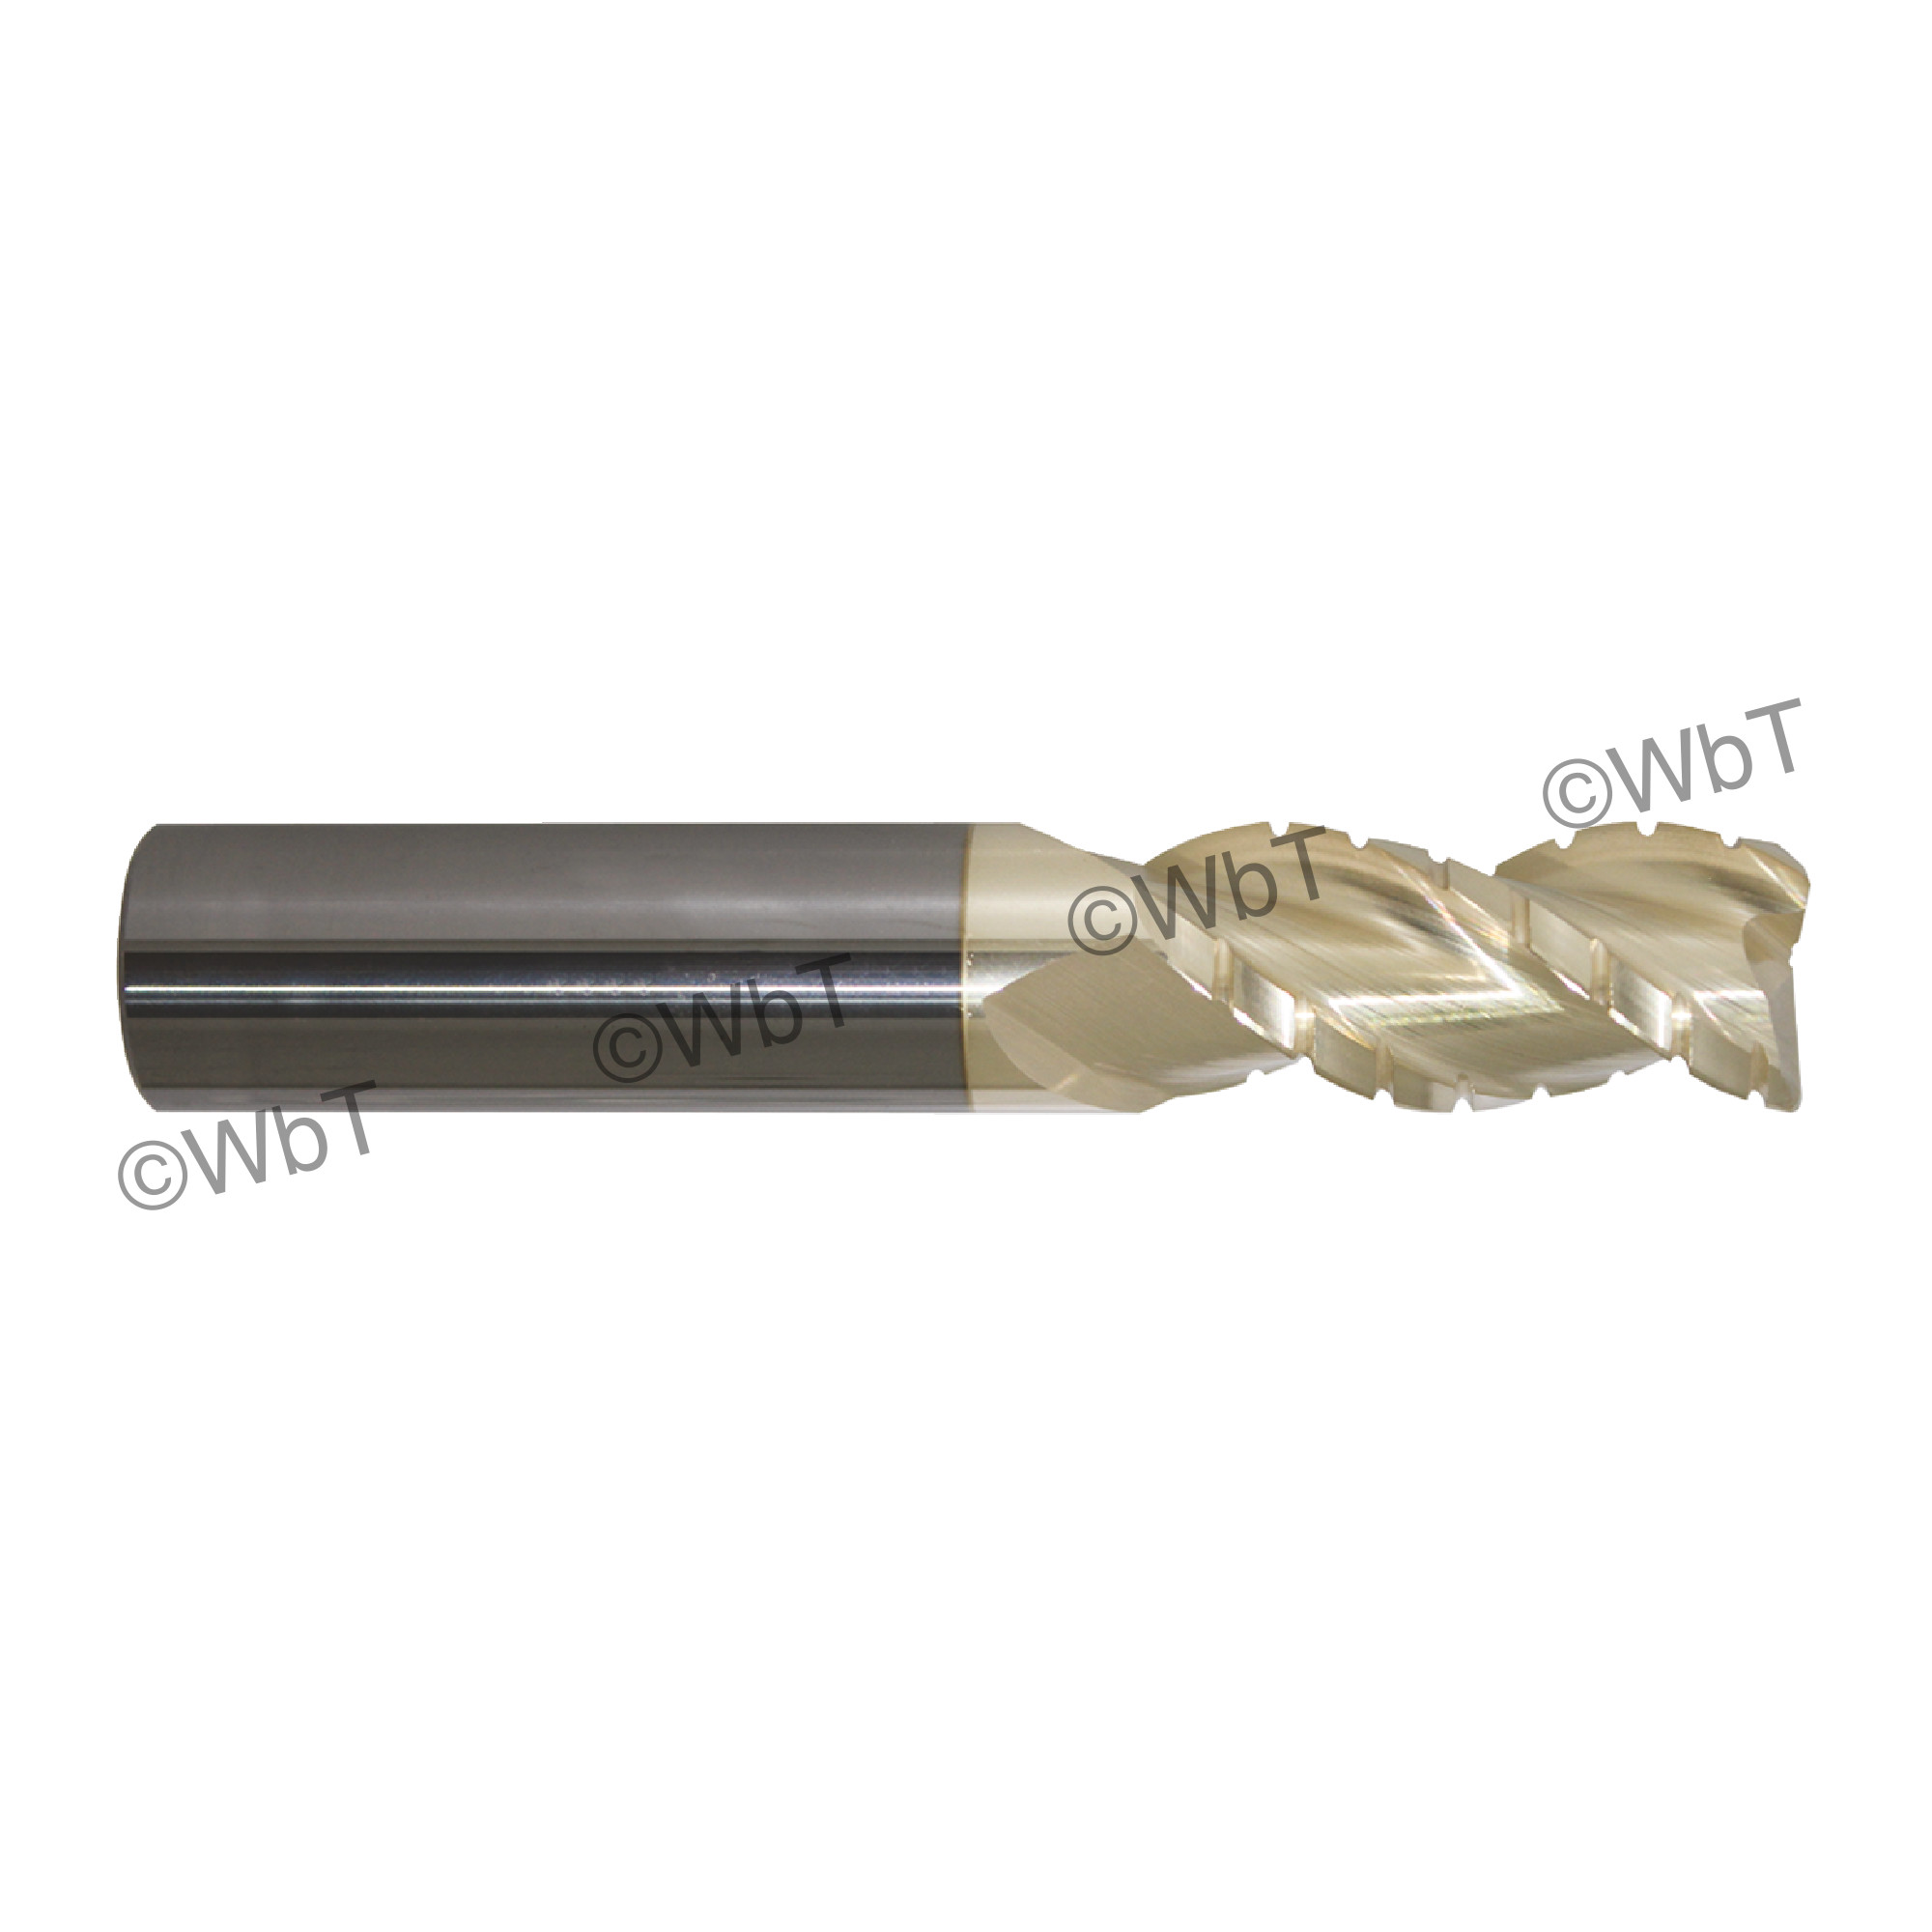 Promax Solid Carbide 3 Flute Roughing-Finishing Corner Radius End Mill 3/8" 119-02436 Series 119